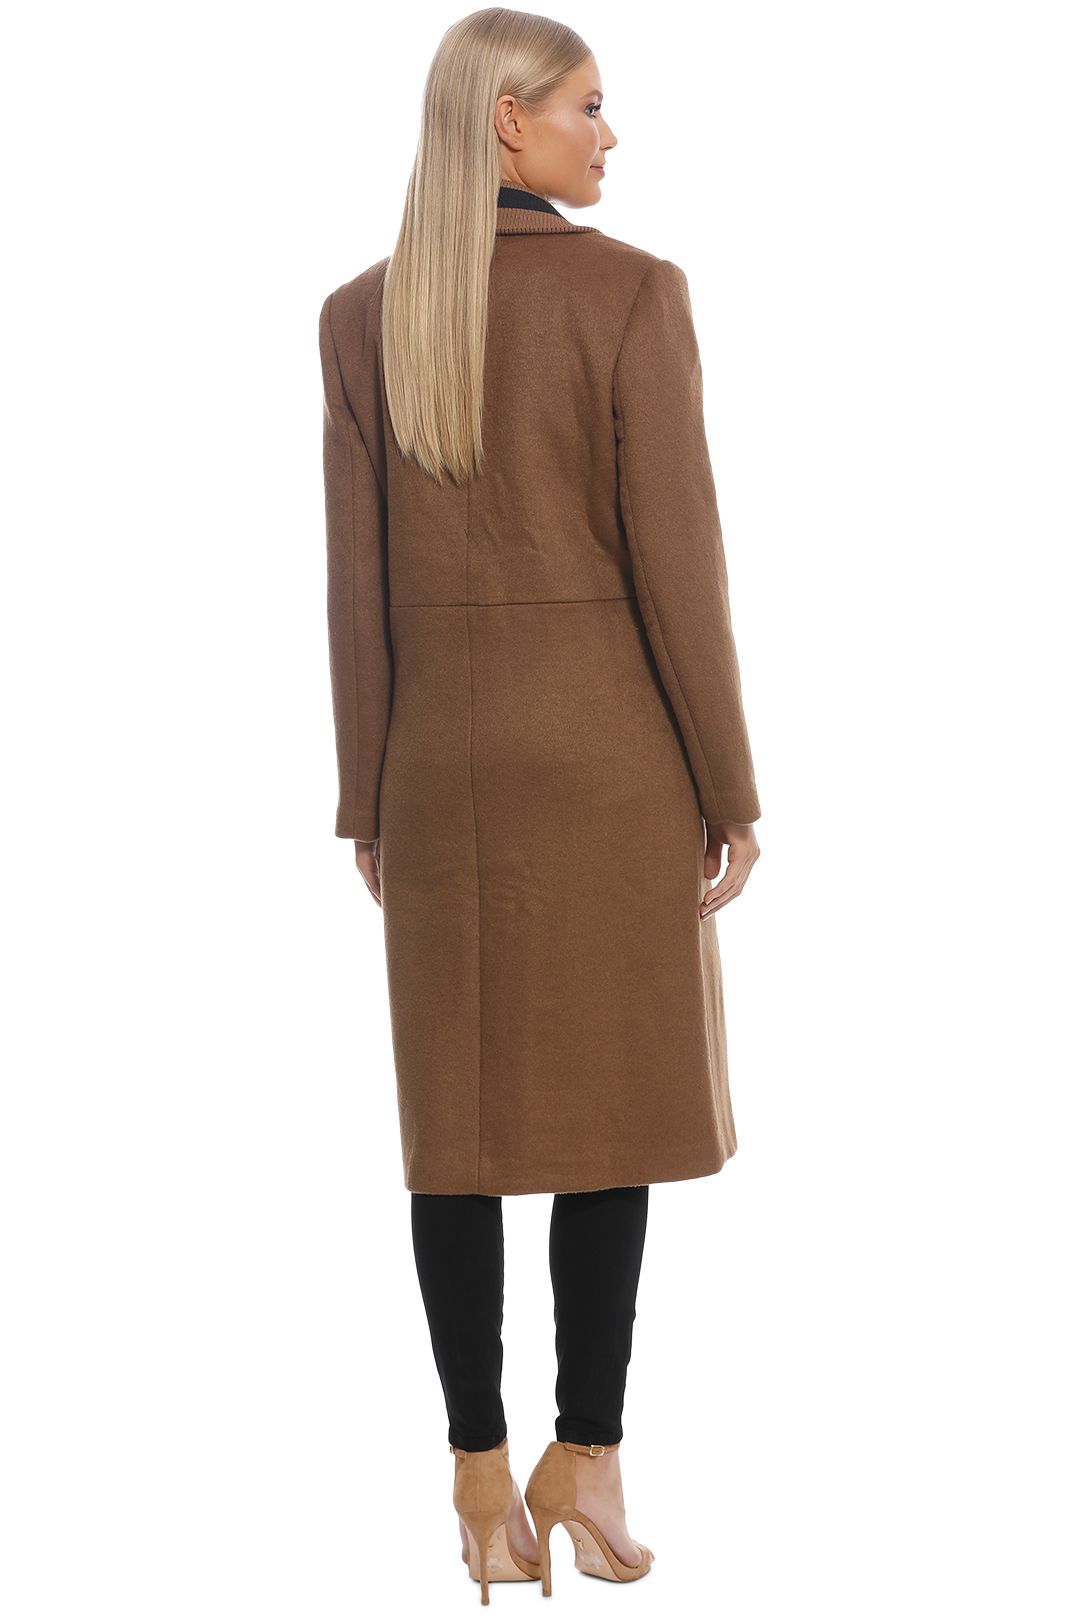 CMEO Collective - Duality Coat - Tan - Back